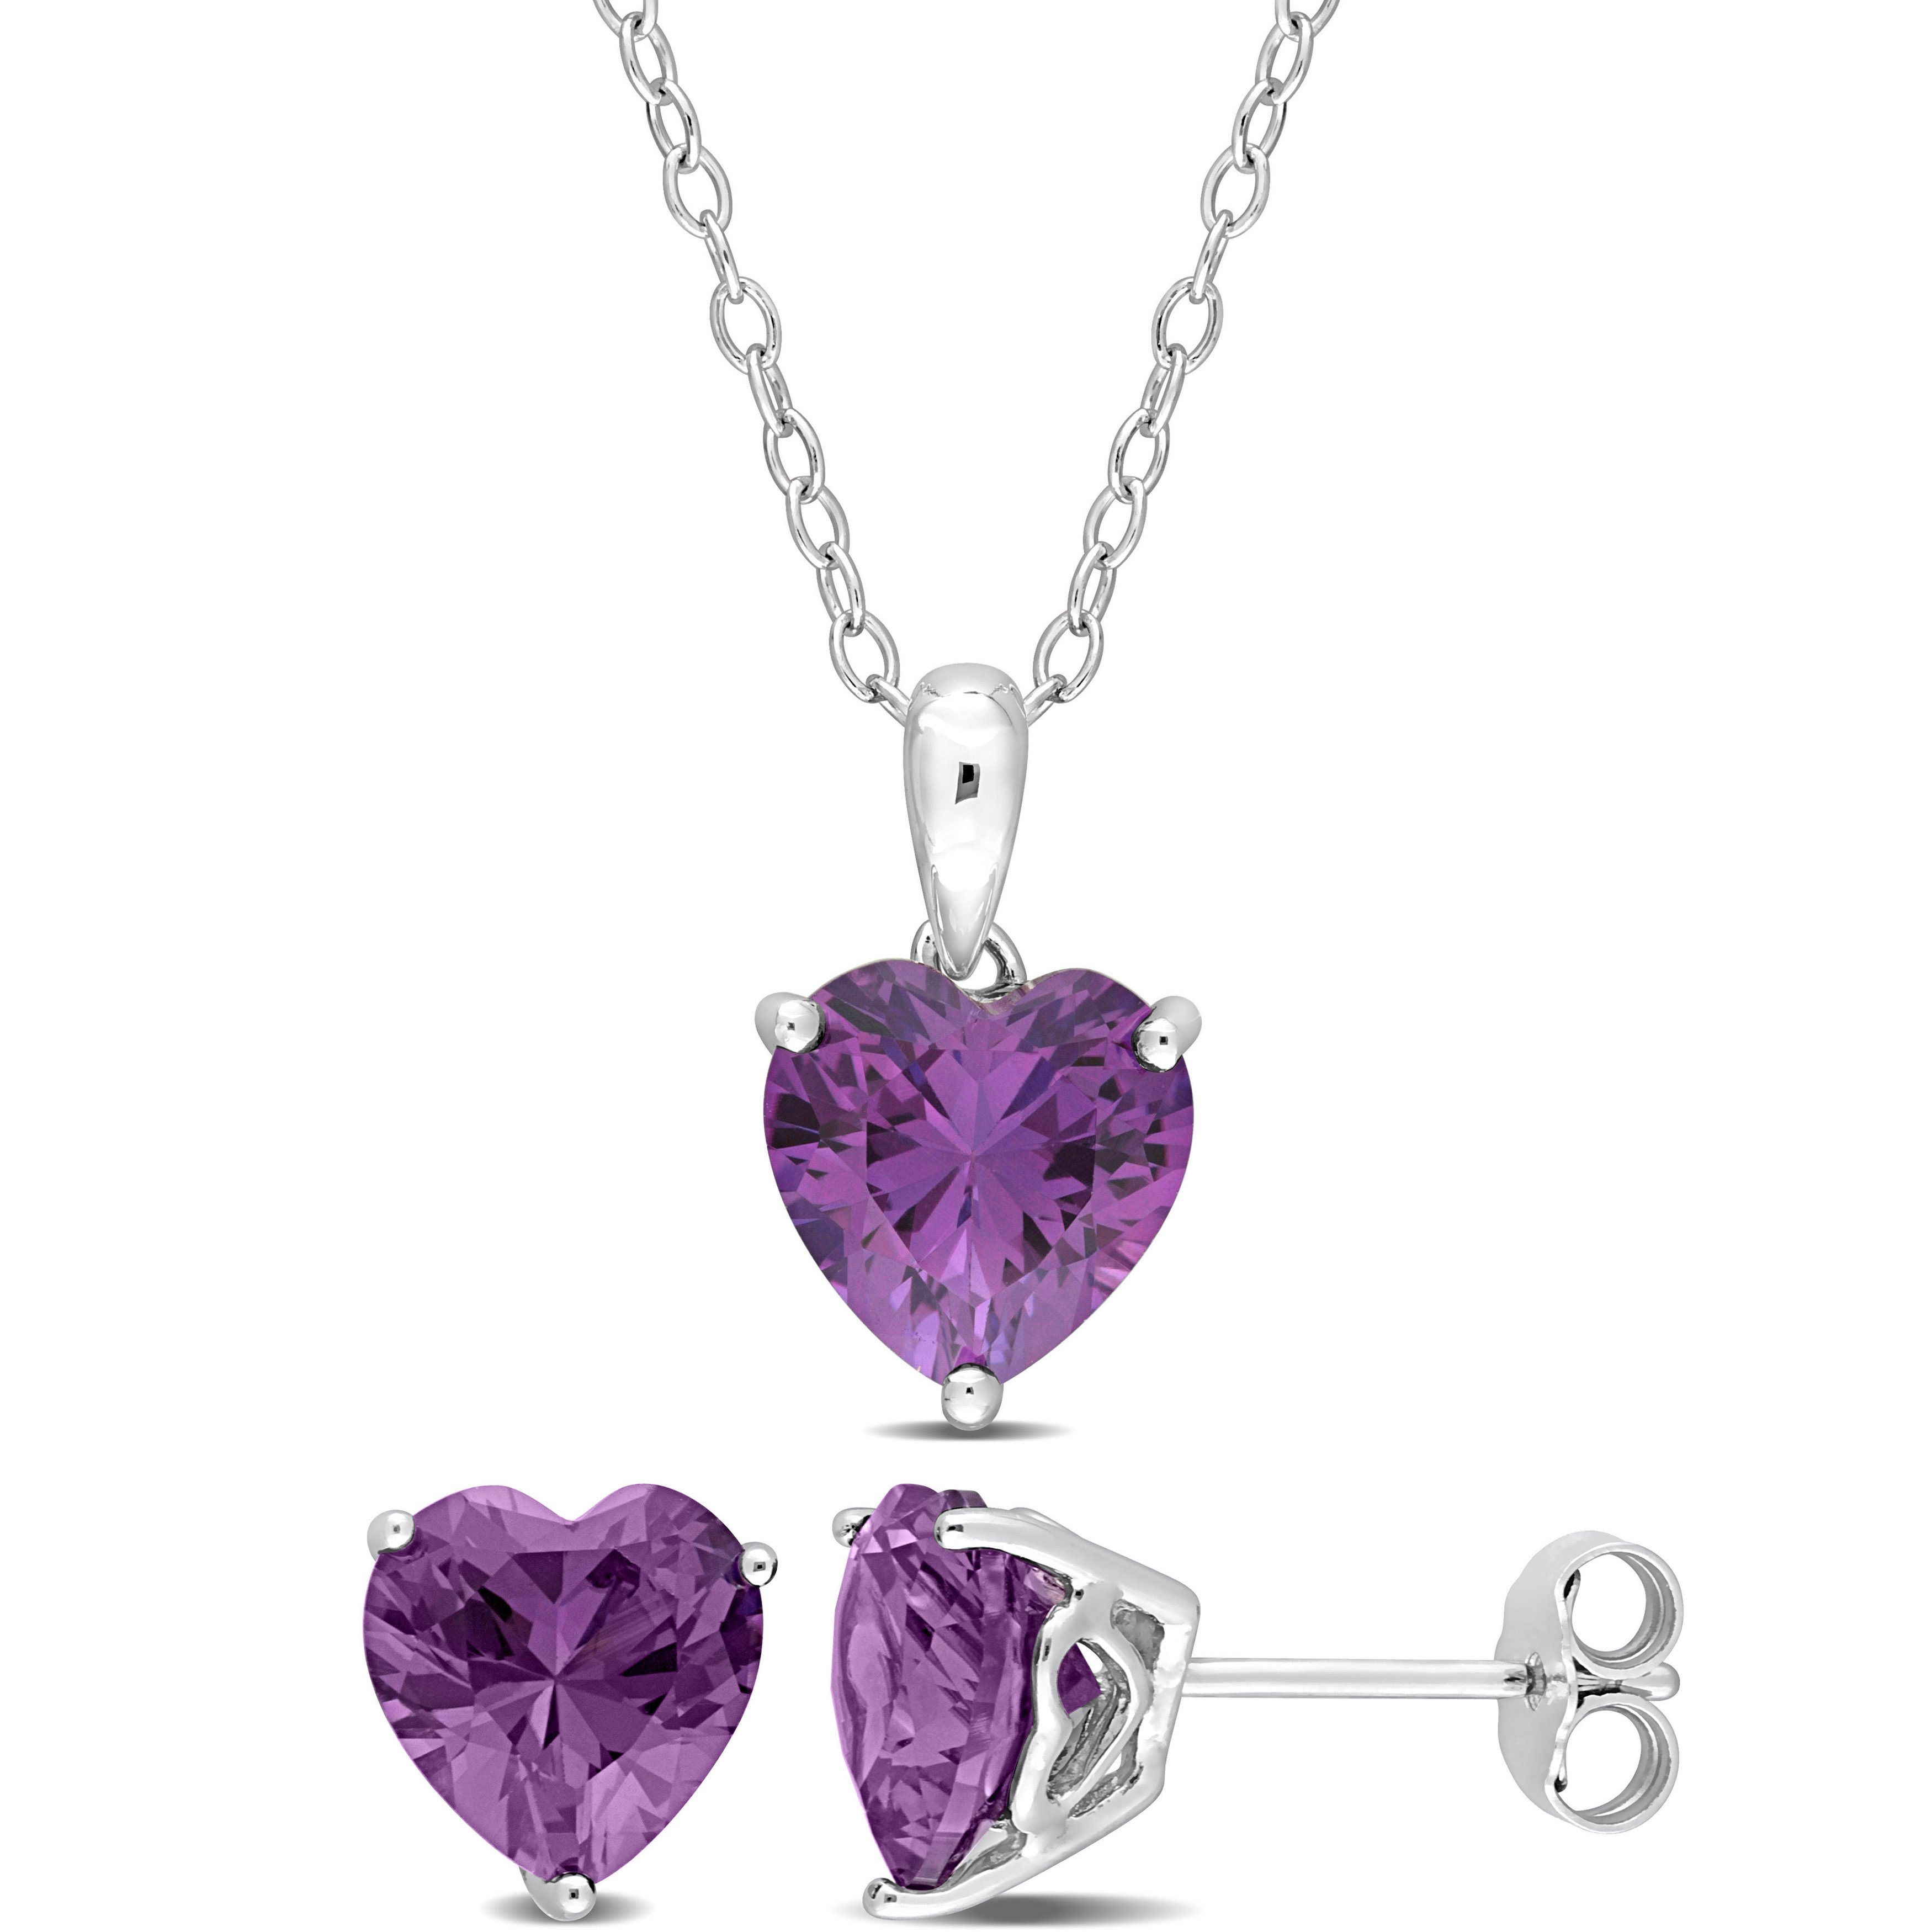 6 4/5 CT TGW Heart Simulated Alexandrite 2-Piece Set of Pendant with Chain and Earrings in Sterling Silver